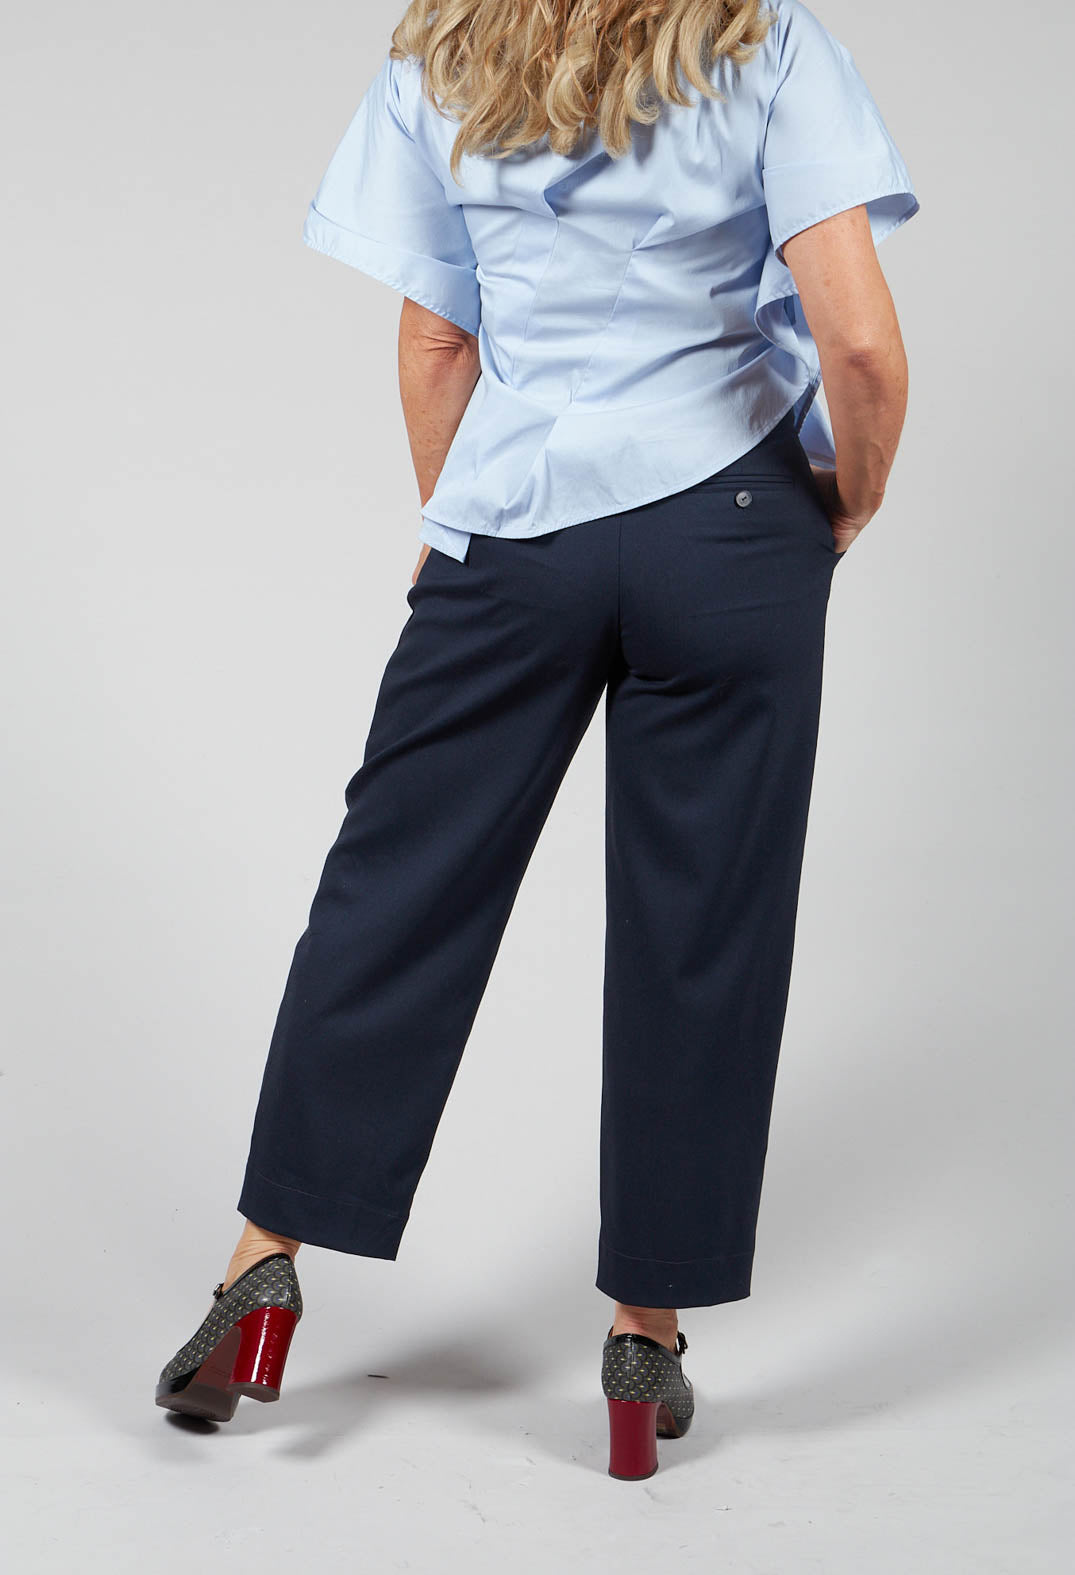 Tailored Trousers in Navy